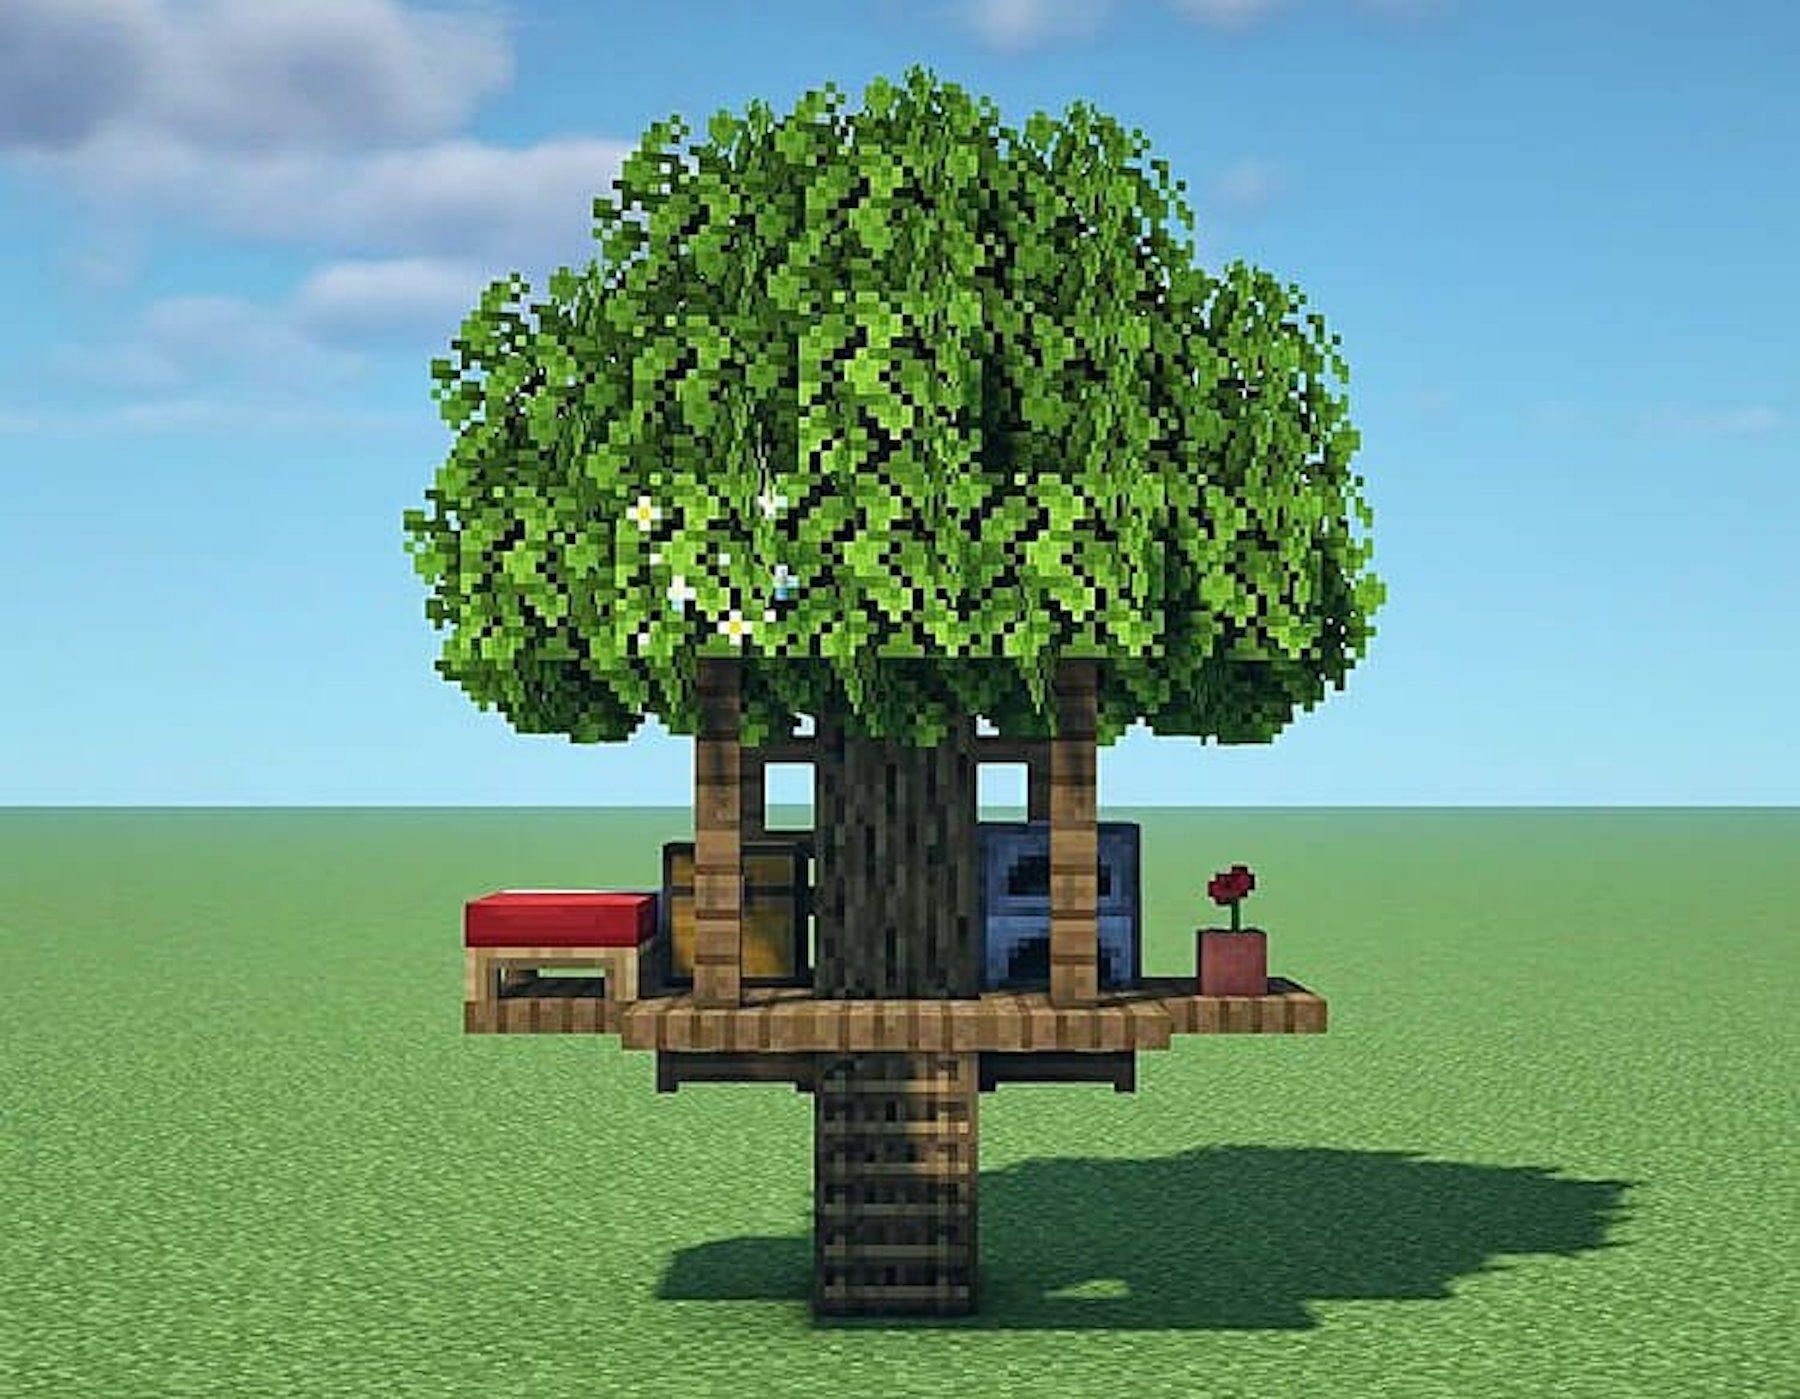 A minimalist treehouse features the bare minimum for what users need (Image via artic.uno_mc/Instagram)